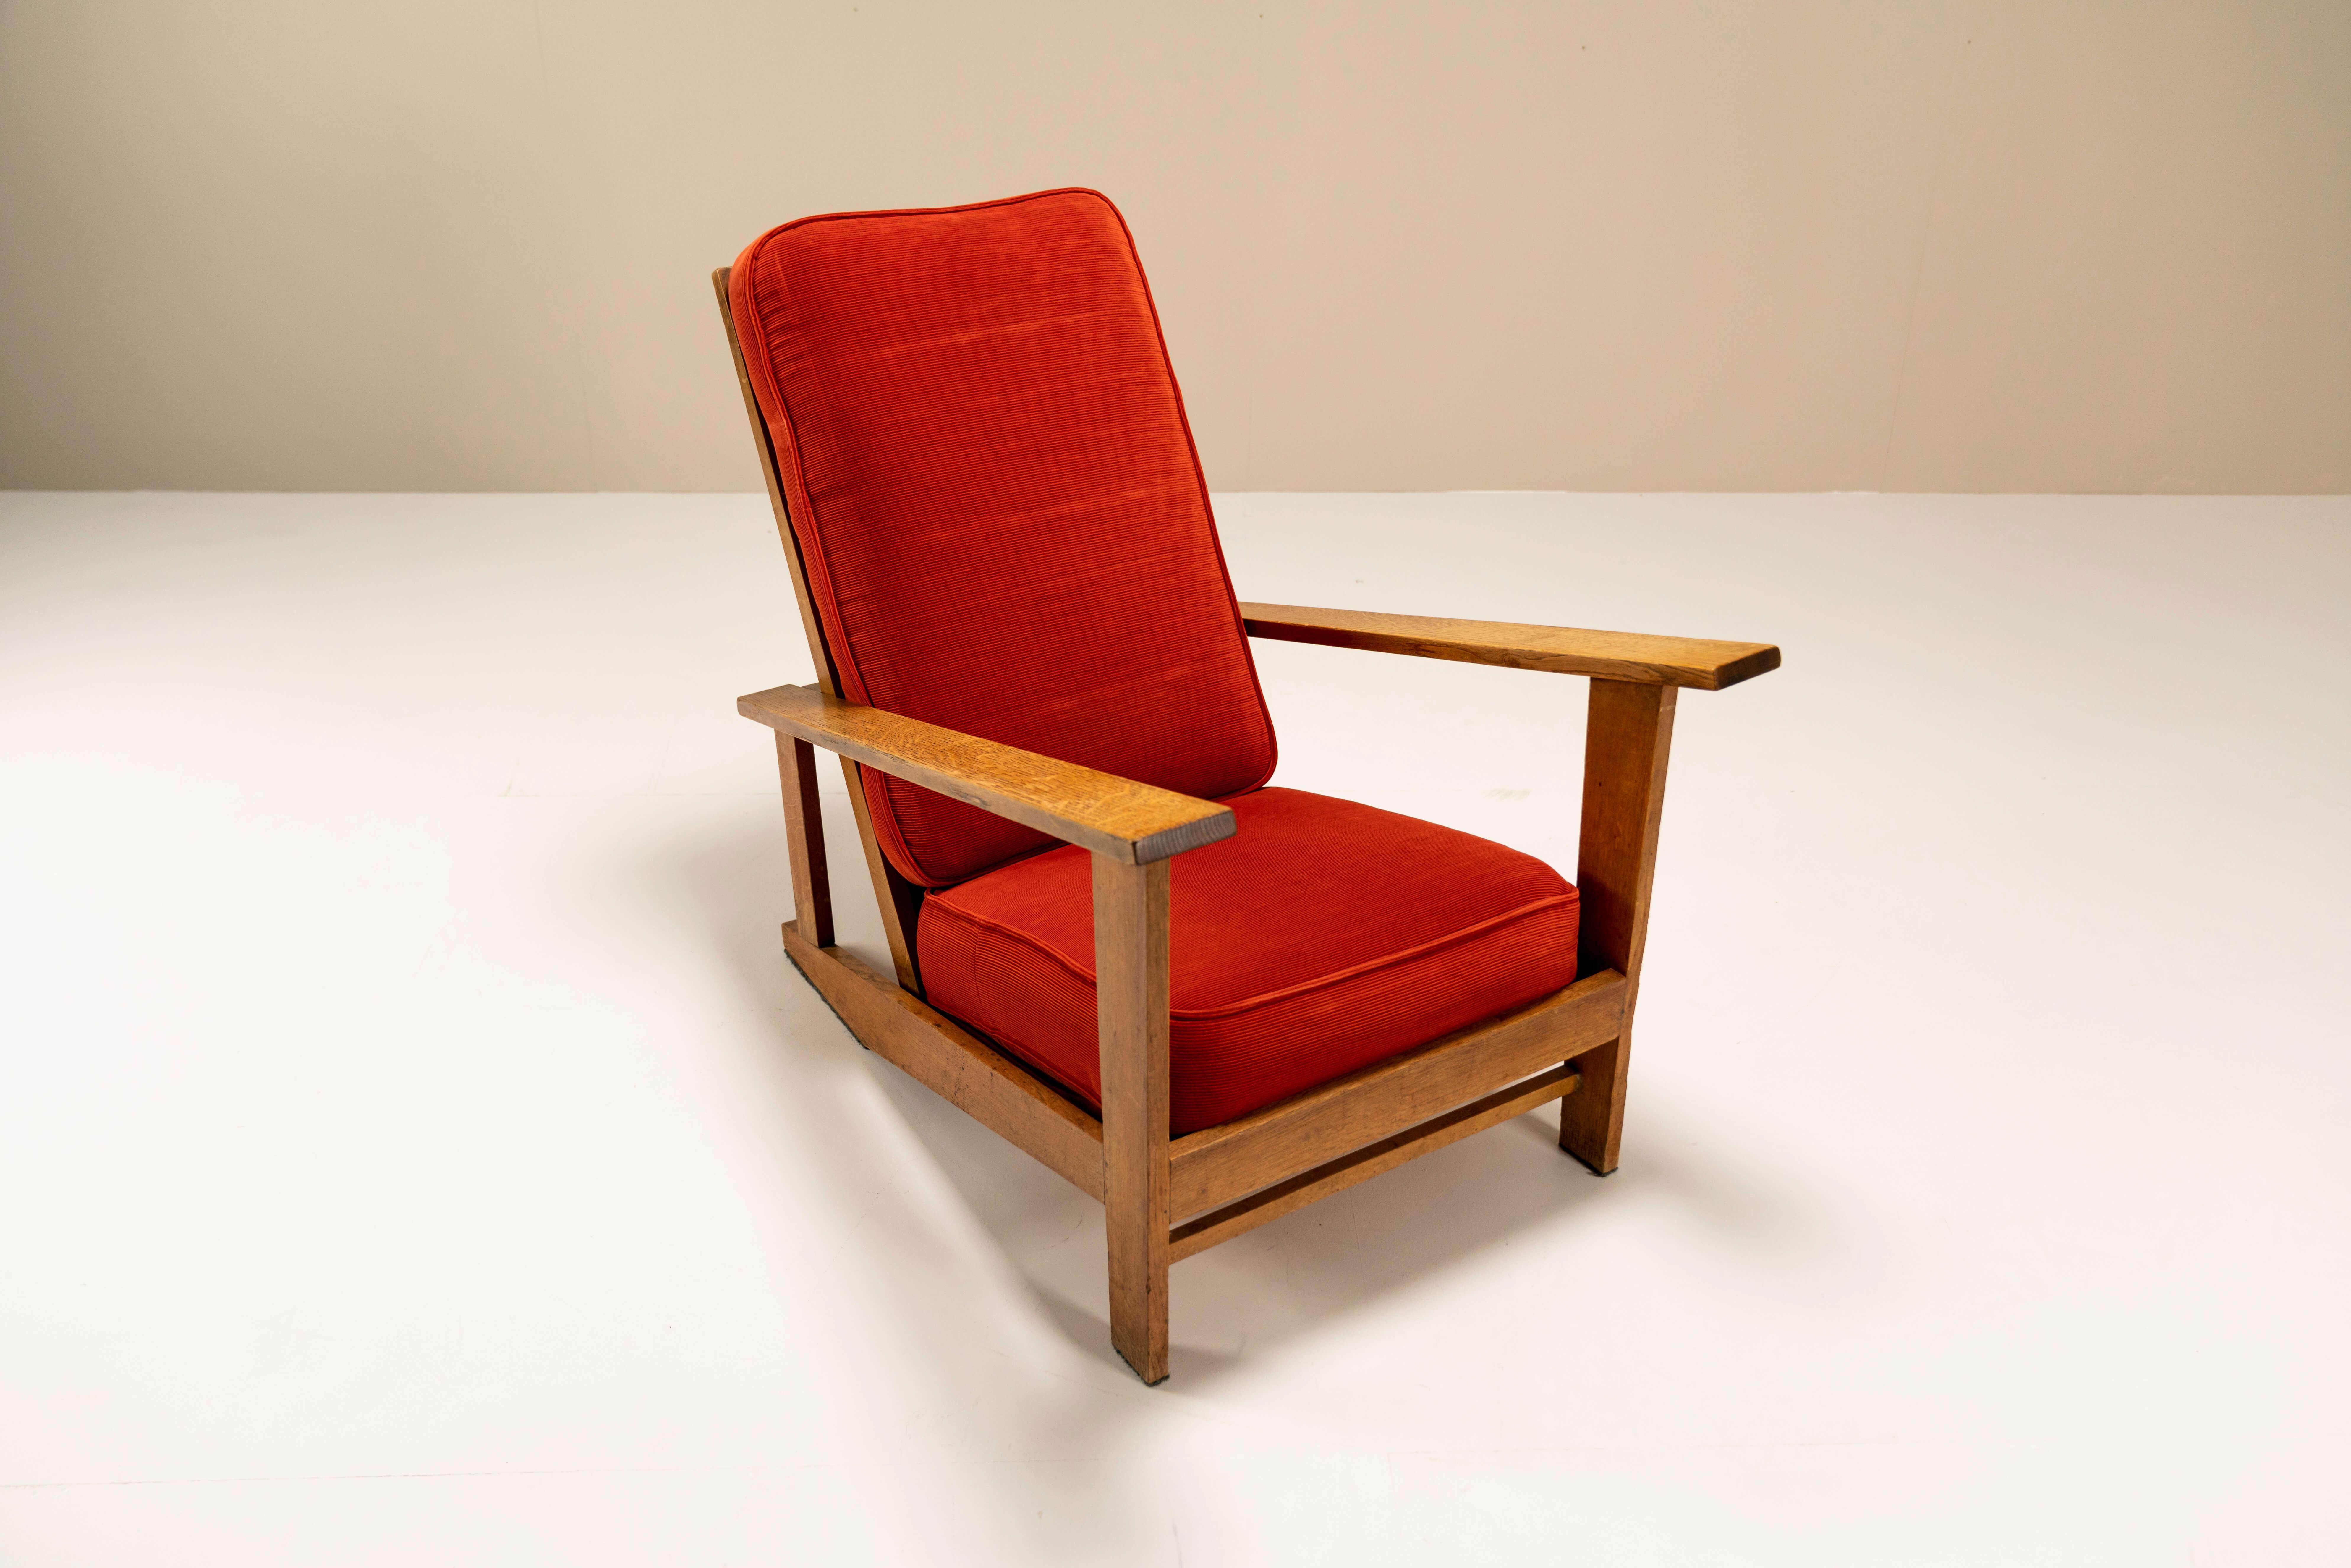 Dutch Lounge Chairs in Beech and Vermillion Upholstery Attr. to Groenekan 1950s For Sale 4